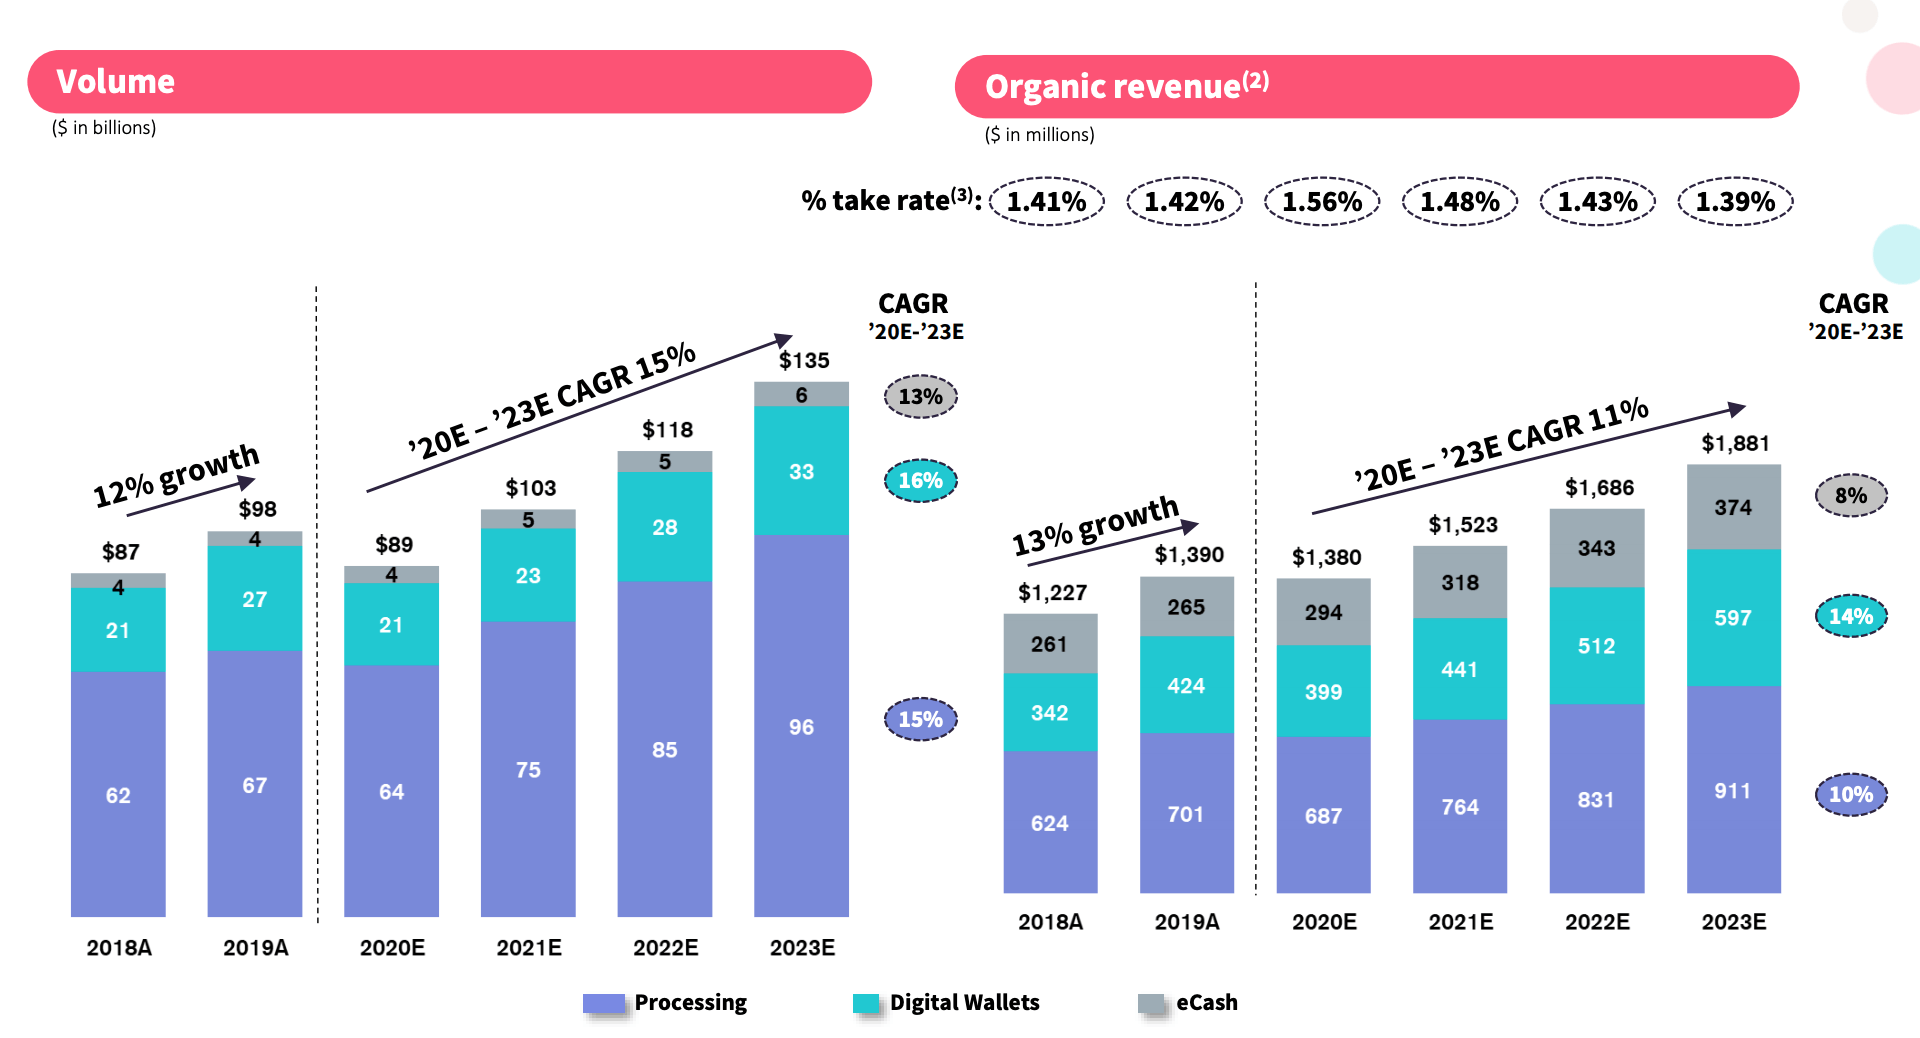 Paysafe revenues and volume growth